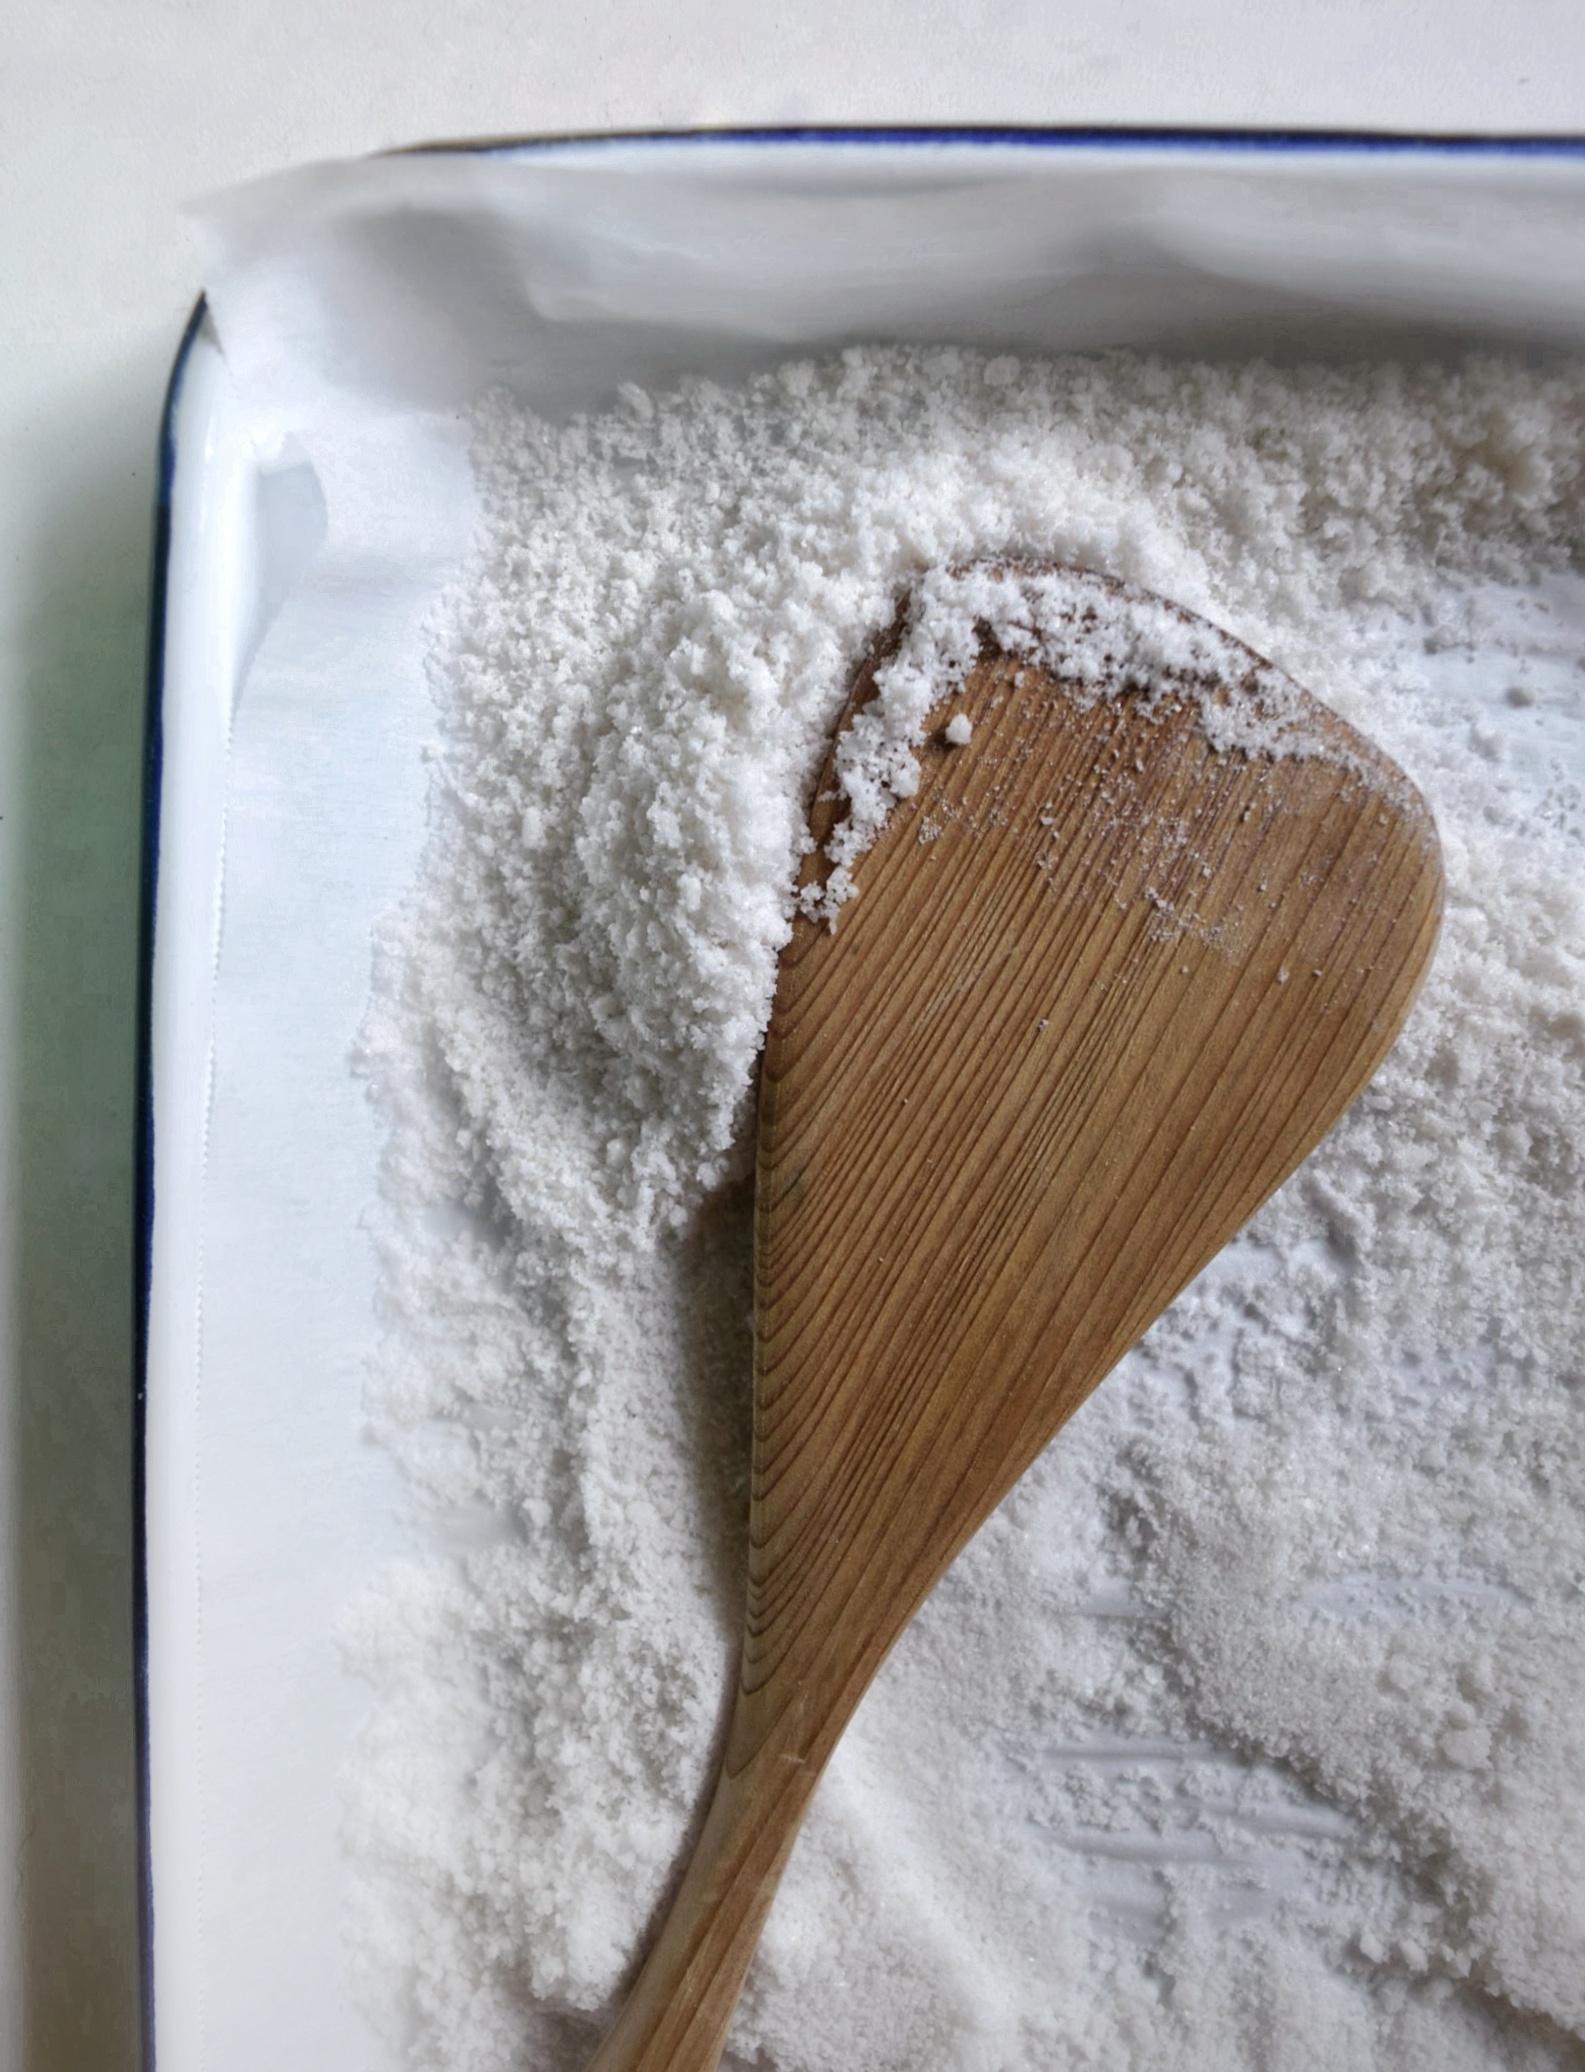 Homemade Sea Salt (yes, you can really make it yourself!)